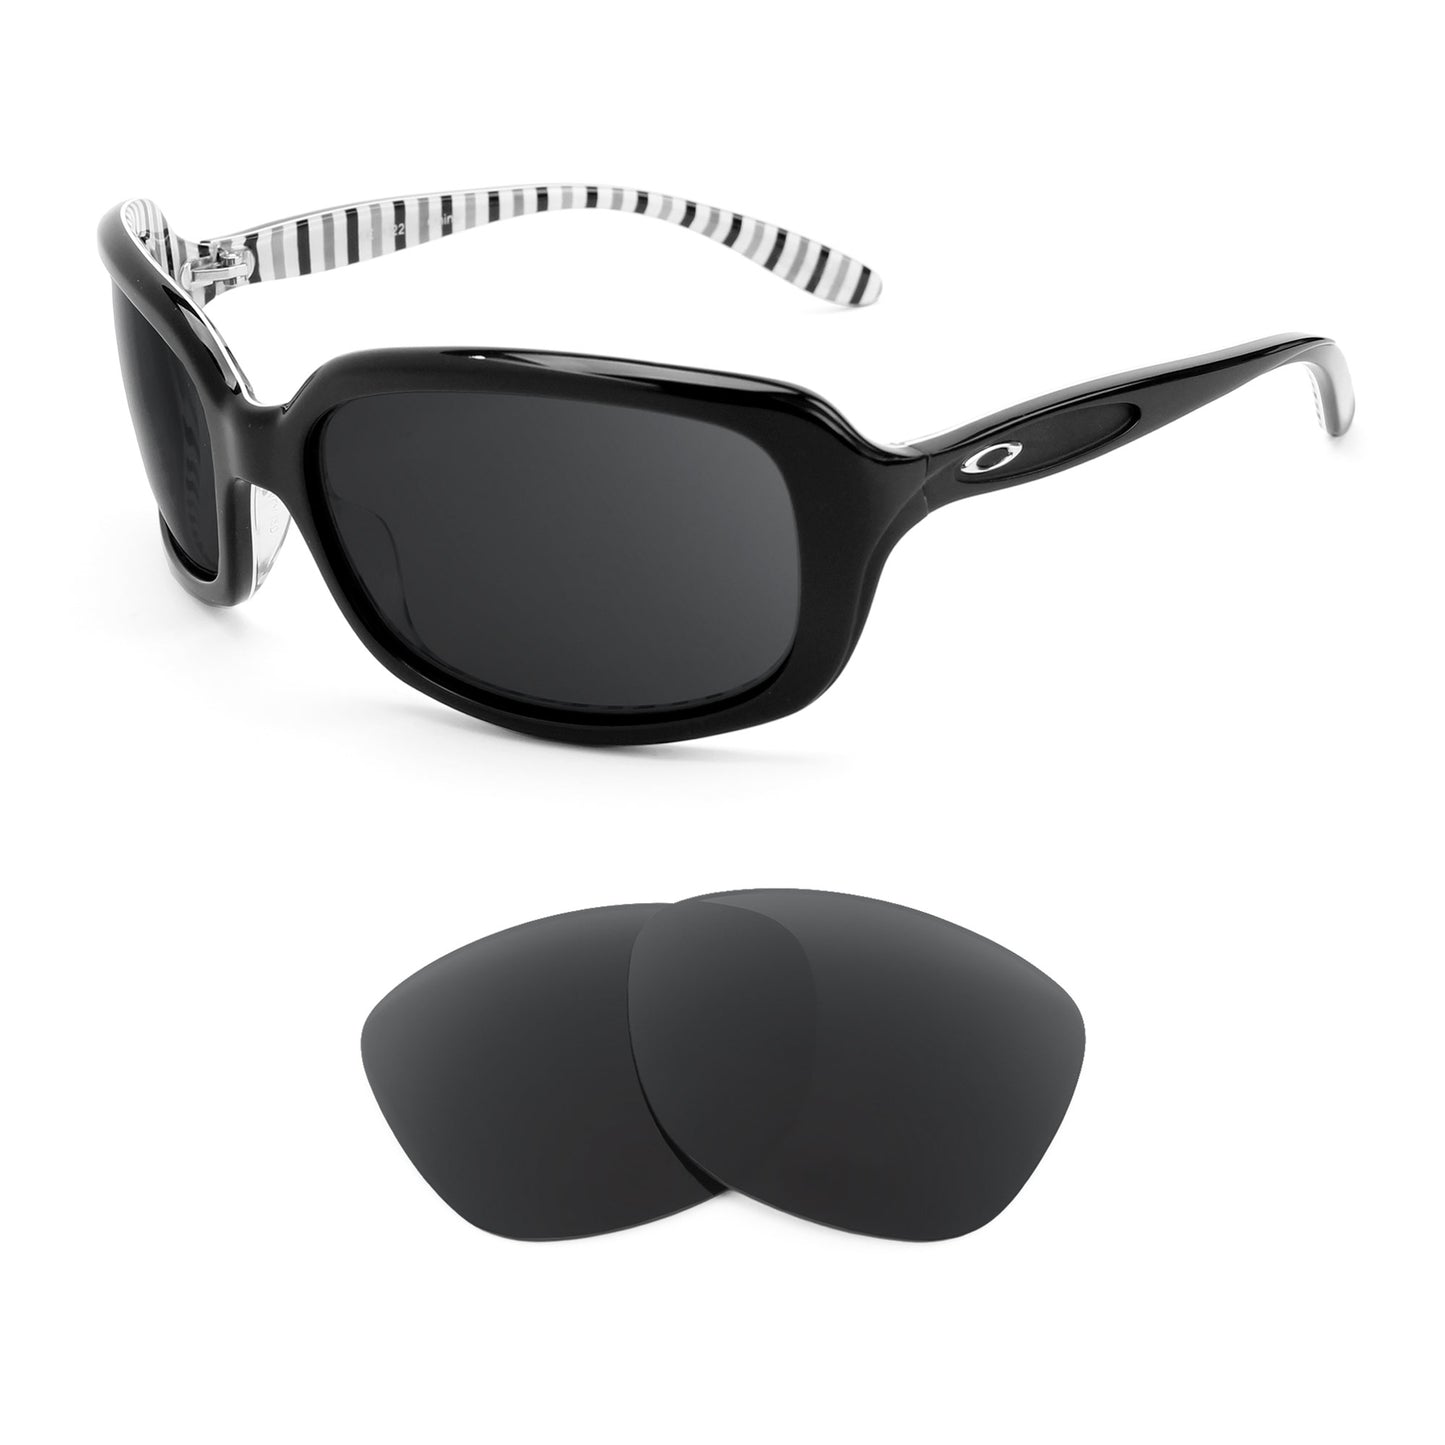 Oakley Disguise sunglasses with replacement lenses